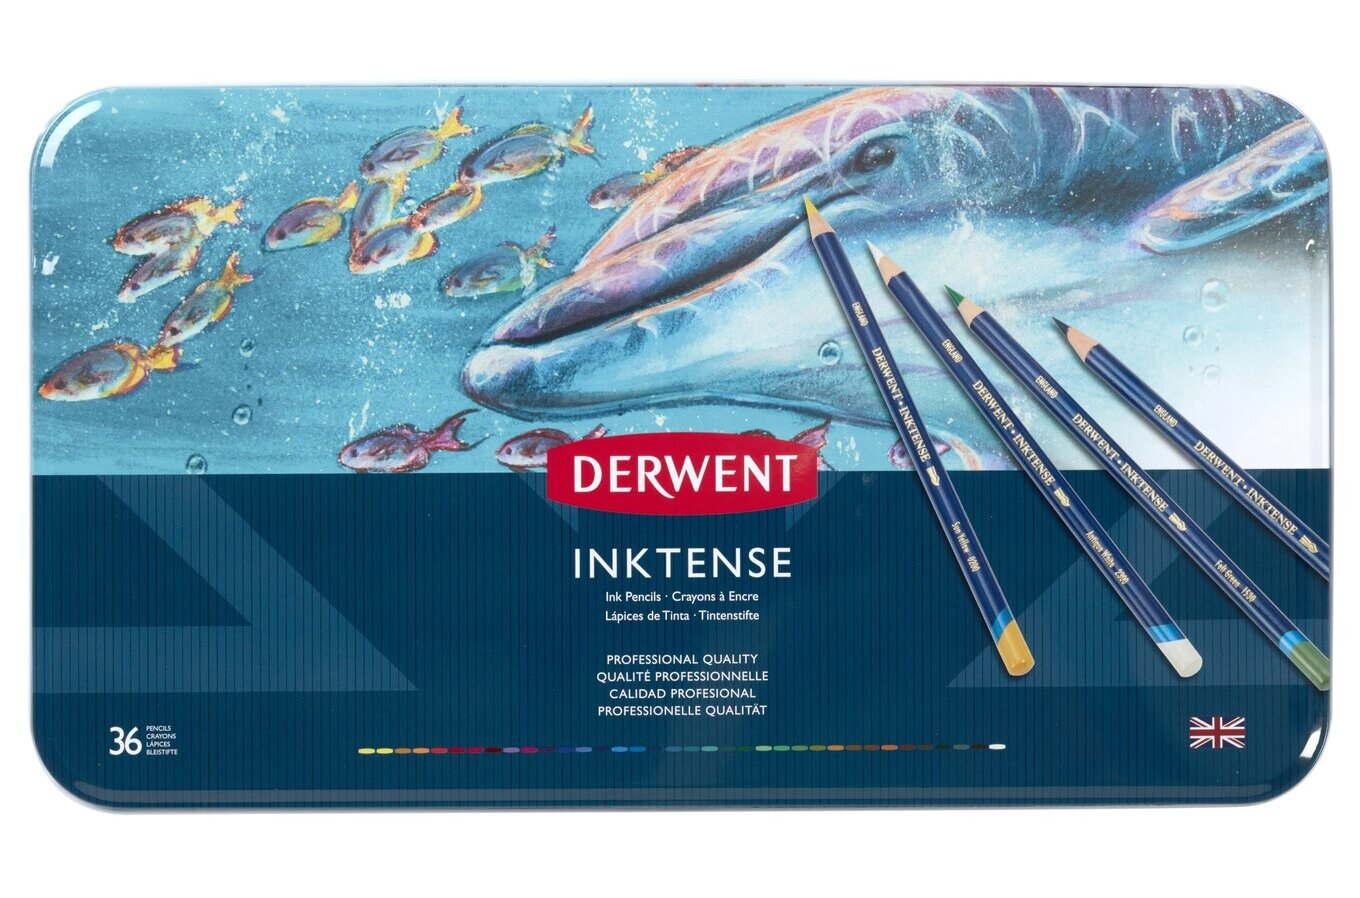 Painting the Artwork for the New Derwent Inktense Pencils